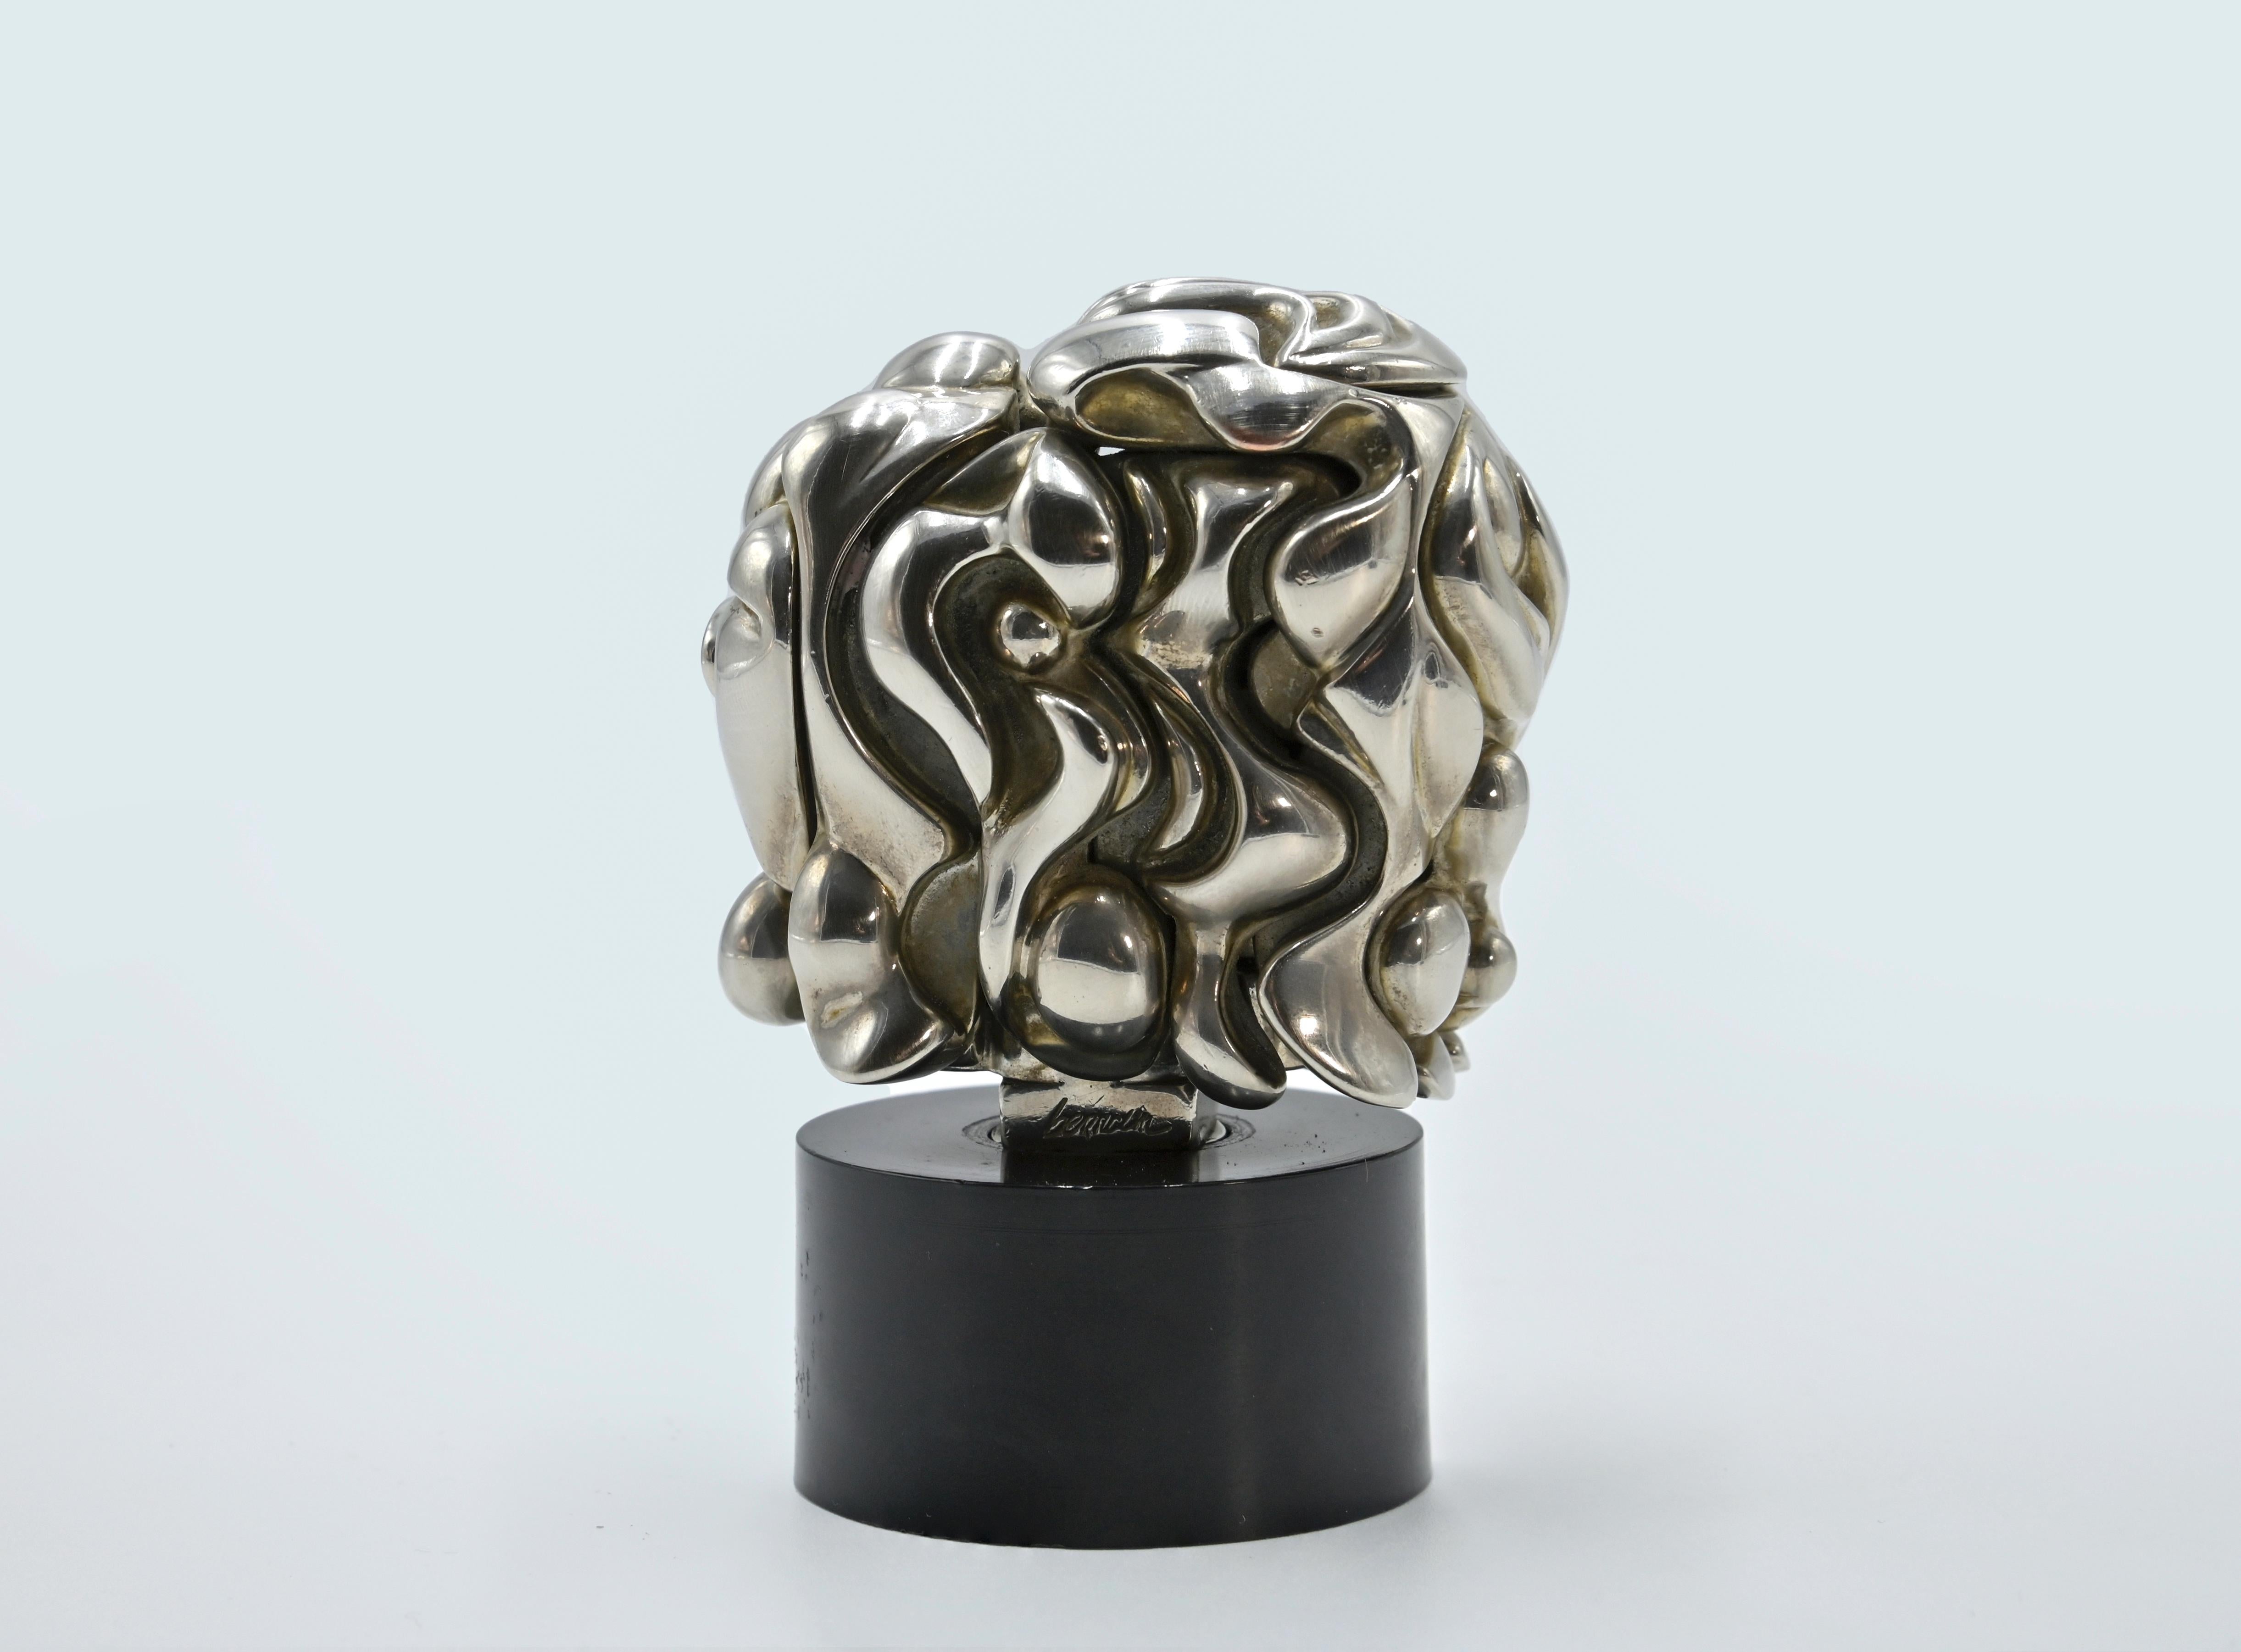 Portrait de Michéle -Opus 110, is realized by Miguel Berrocal (Villanueva De Algaidas 1933 - Antequera 2006), in 1969.

Multiple sculpture in nickel-plated Zamak dismountable into 17 elements with gilt brass and enamel ring, plastic base, signed and